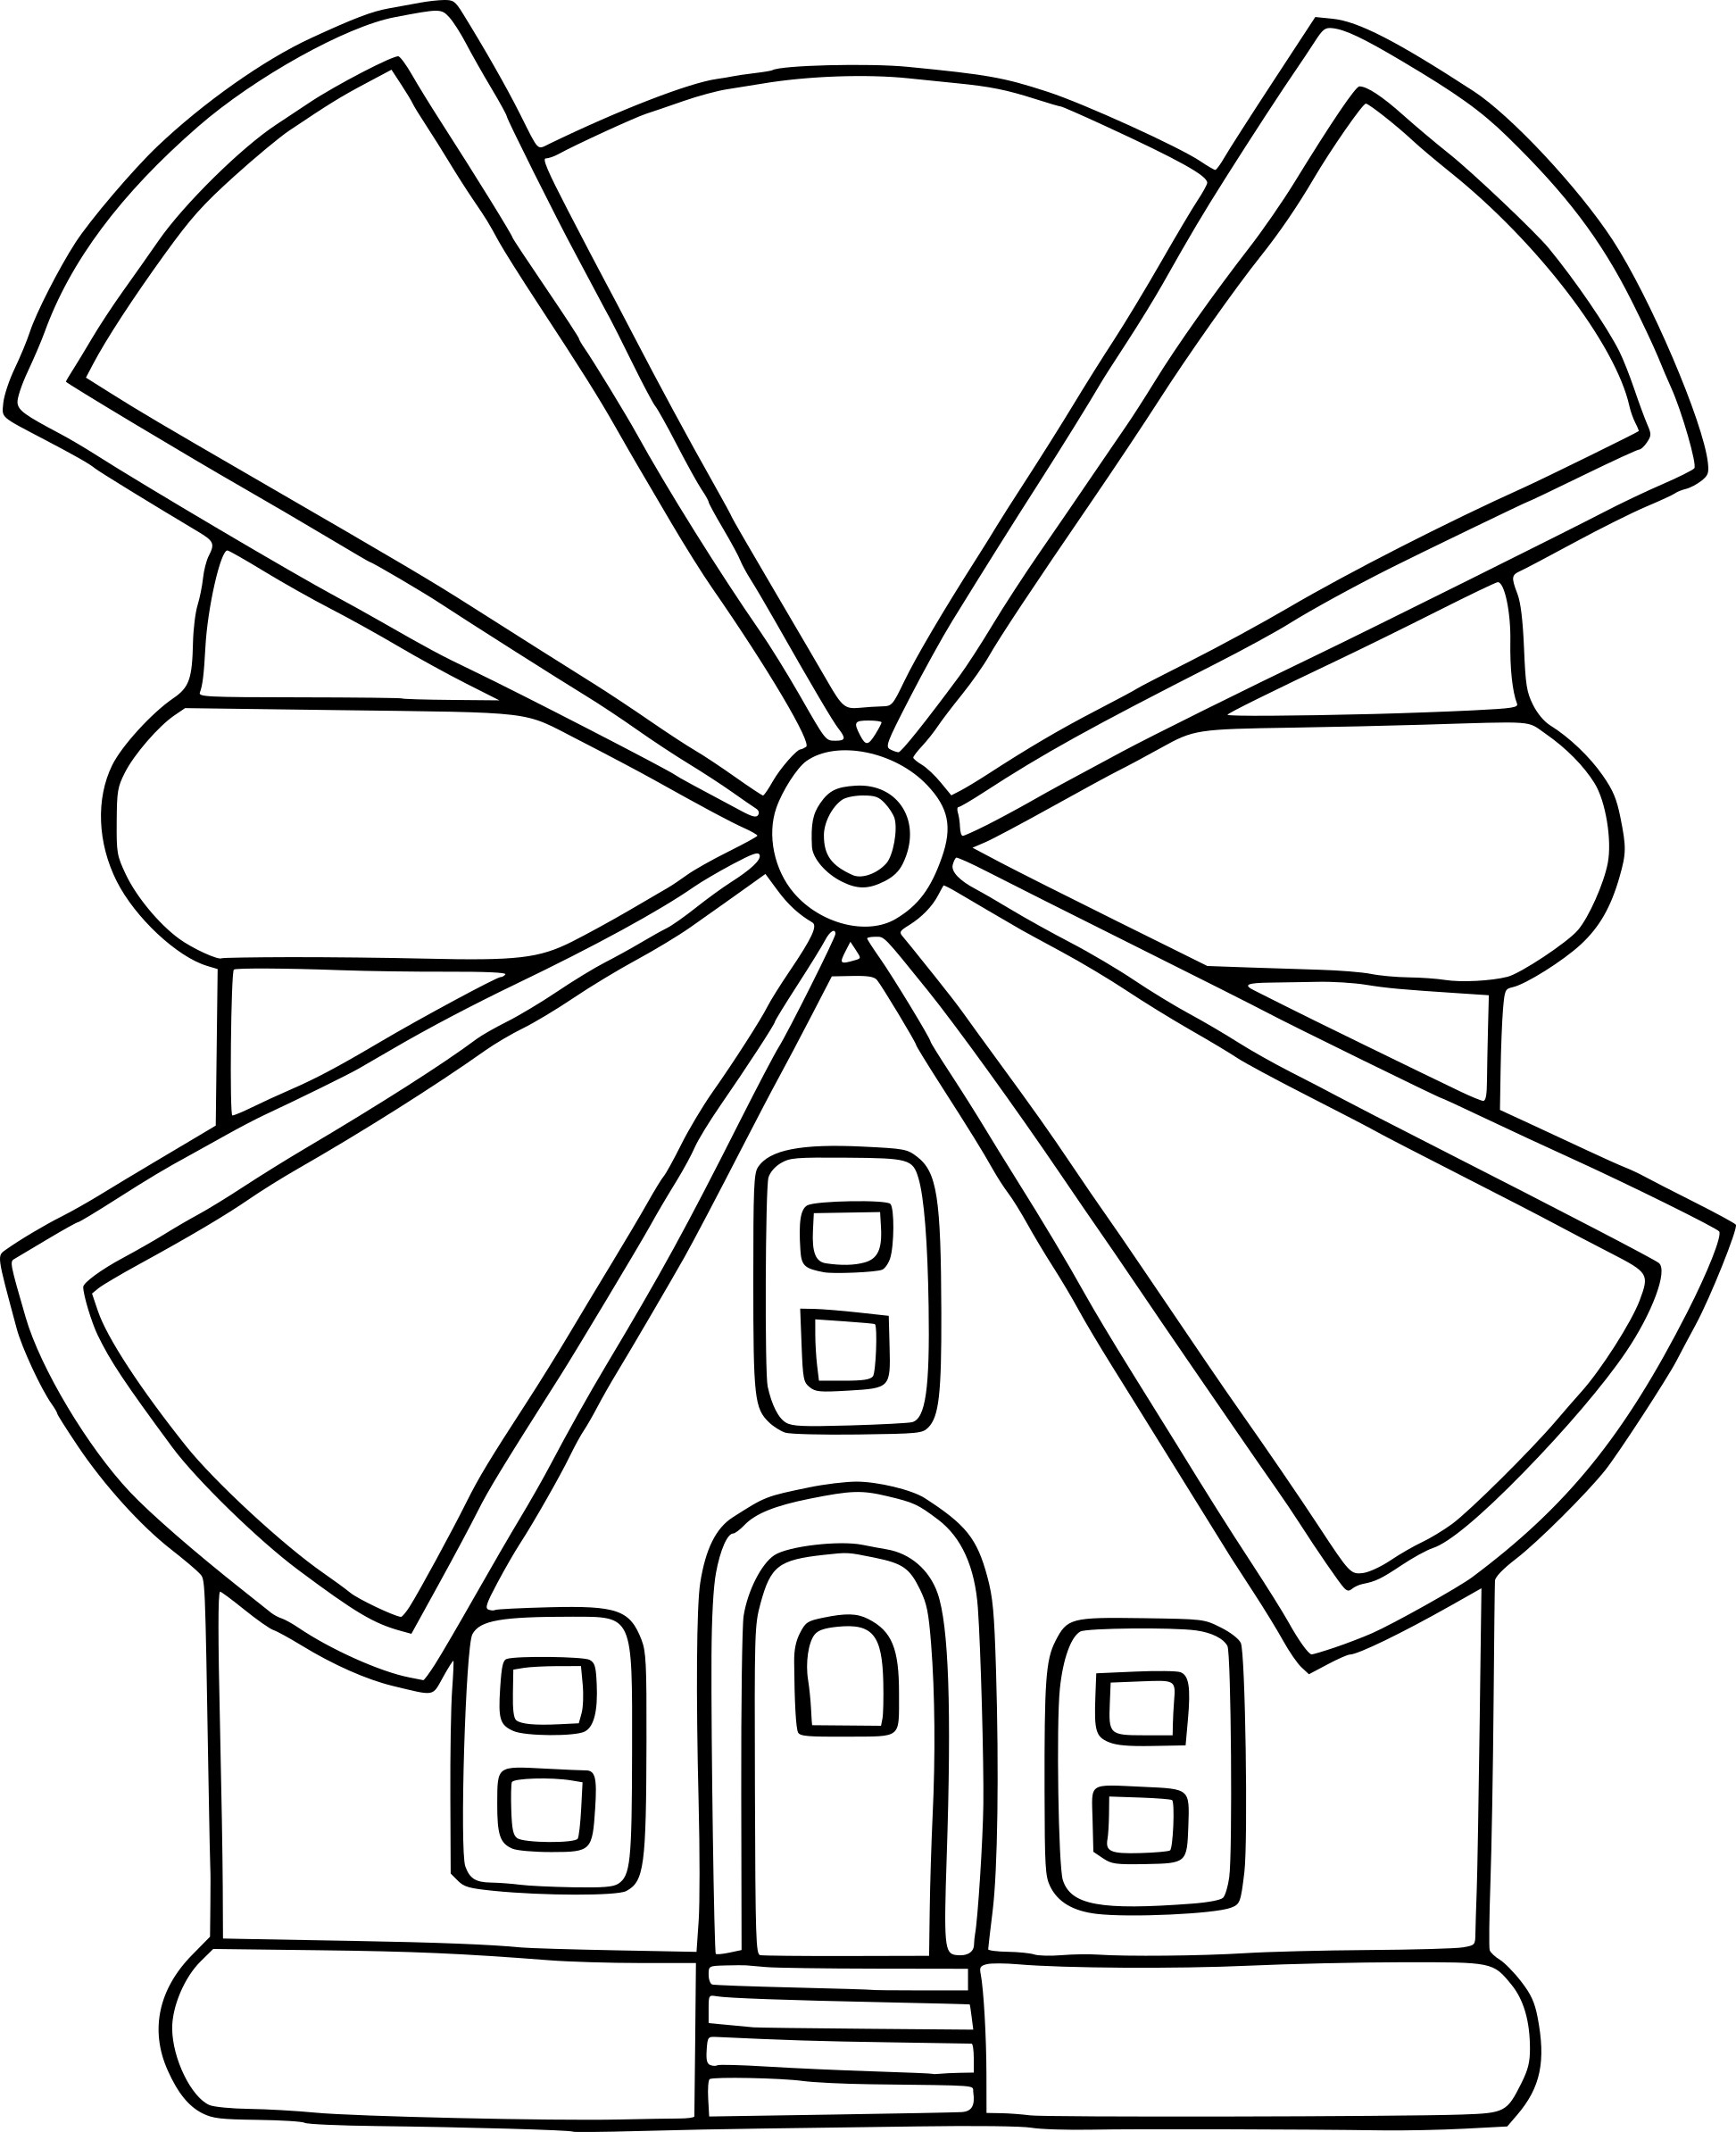 Mill drawing and coloring page